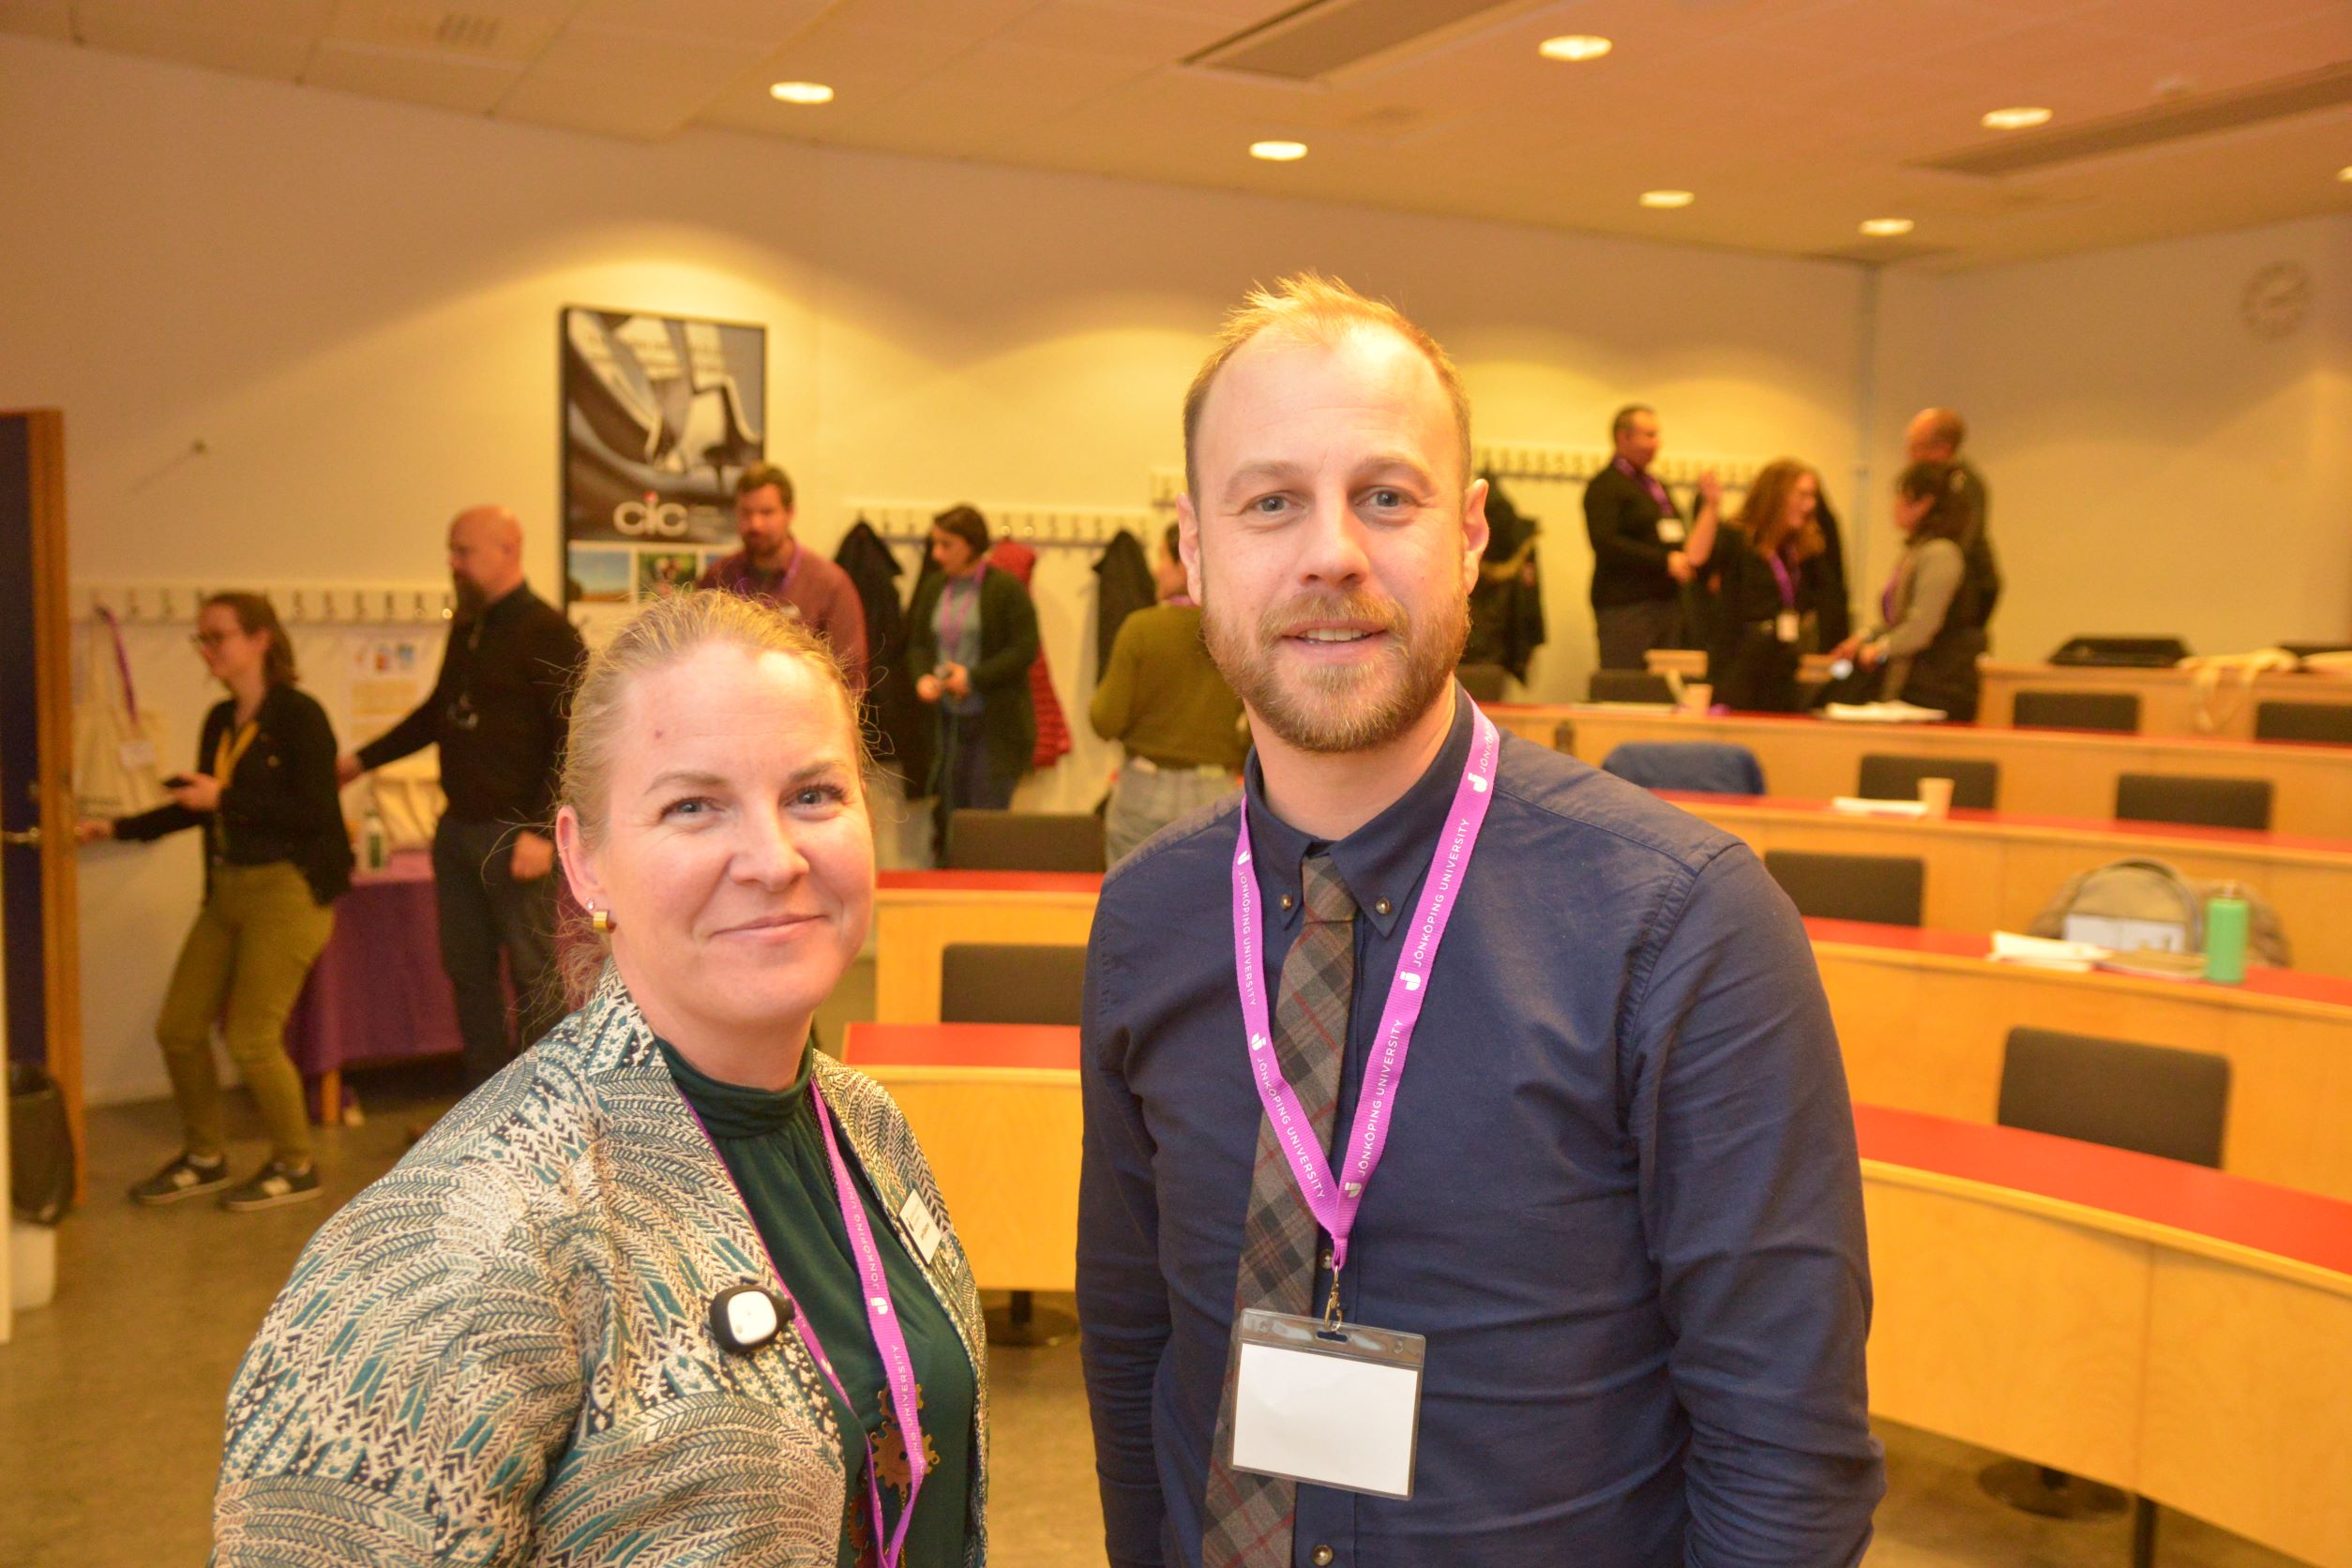 Jenny Bäckstrand, local project manager for the graduate school at Jönköping University, and Peter Thorvald, director of the graduate school, during the seminar at Jönköping University.